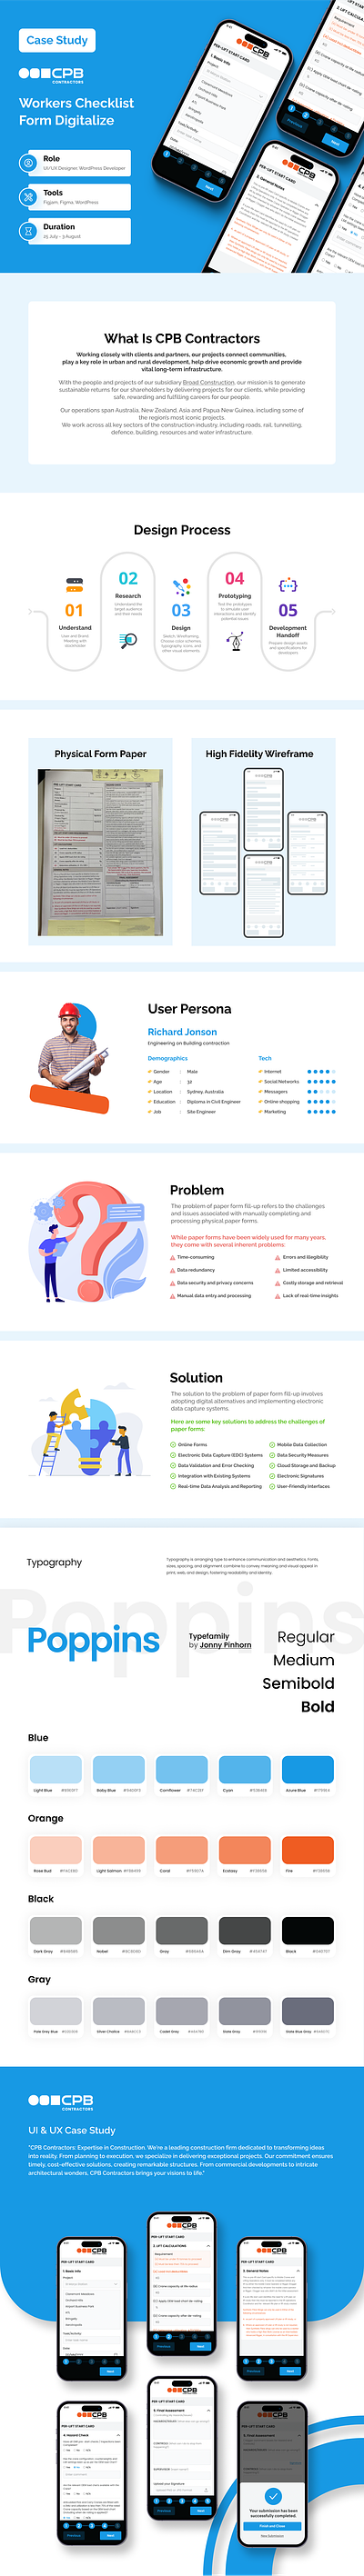 Workers Checklist Form Digitalize👷🏻‍♂️|Case Study|🏗️🚧 case study construction app case study constuction case study mobile app case study problem solving case study product design case study project challenge case study real case study real project case study ui case study ui design uiux uiux case study user interface user persona case study userflow checklist case study ux blog ux case study ux design workerchecklistcasestudy